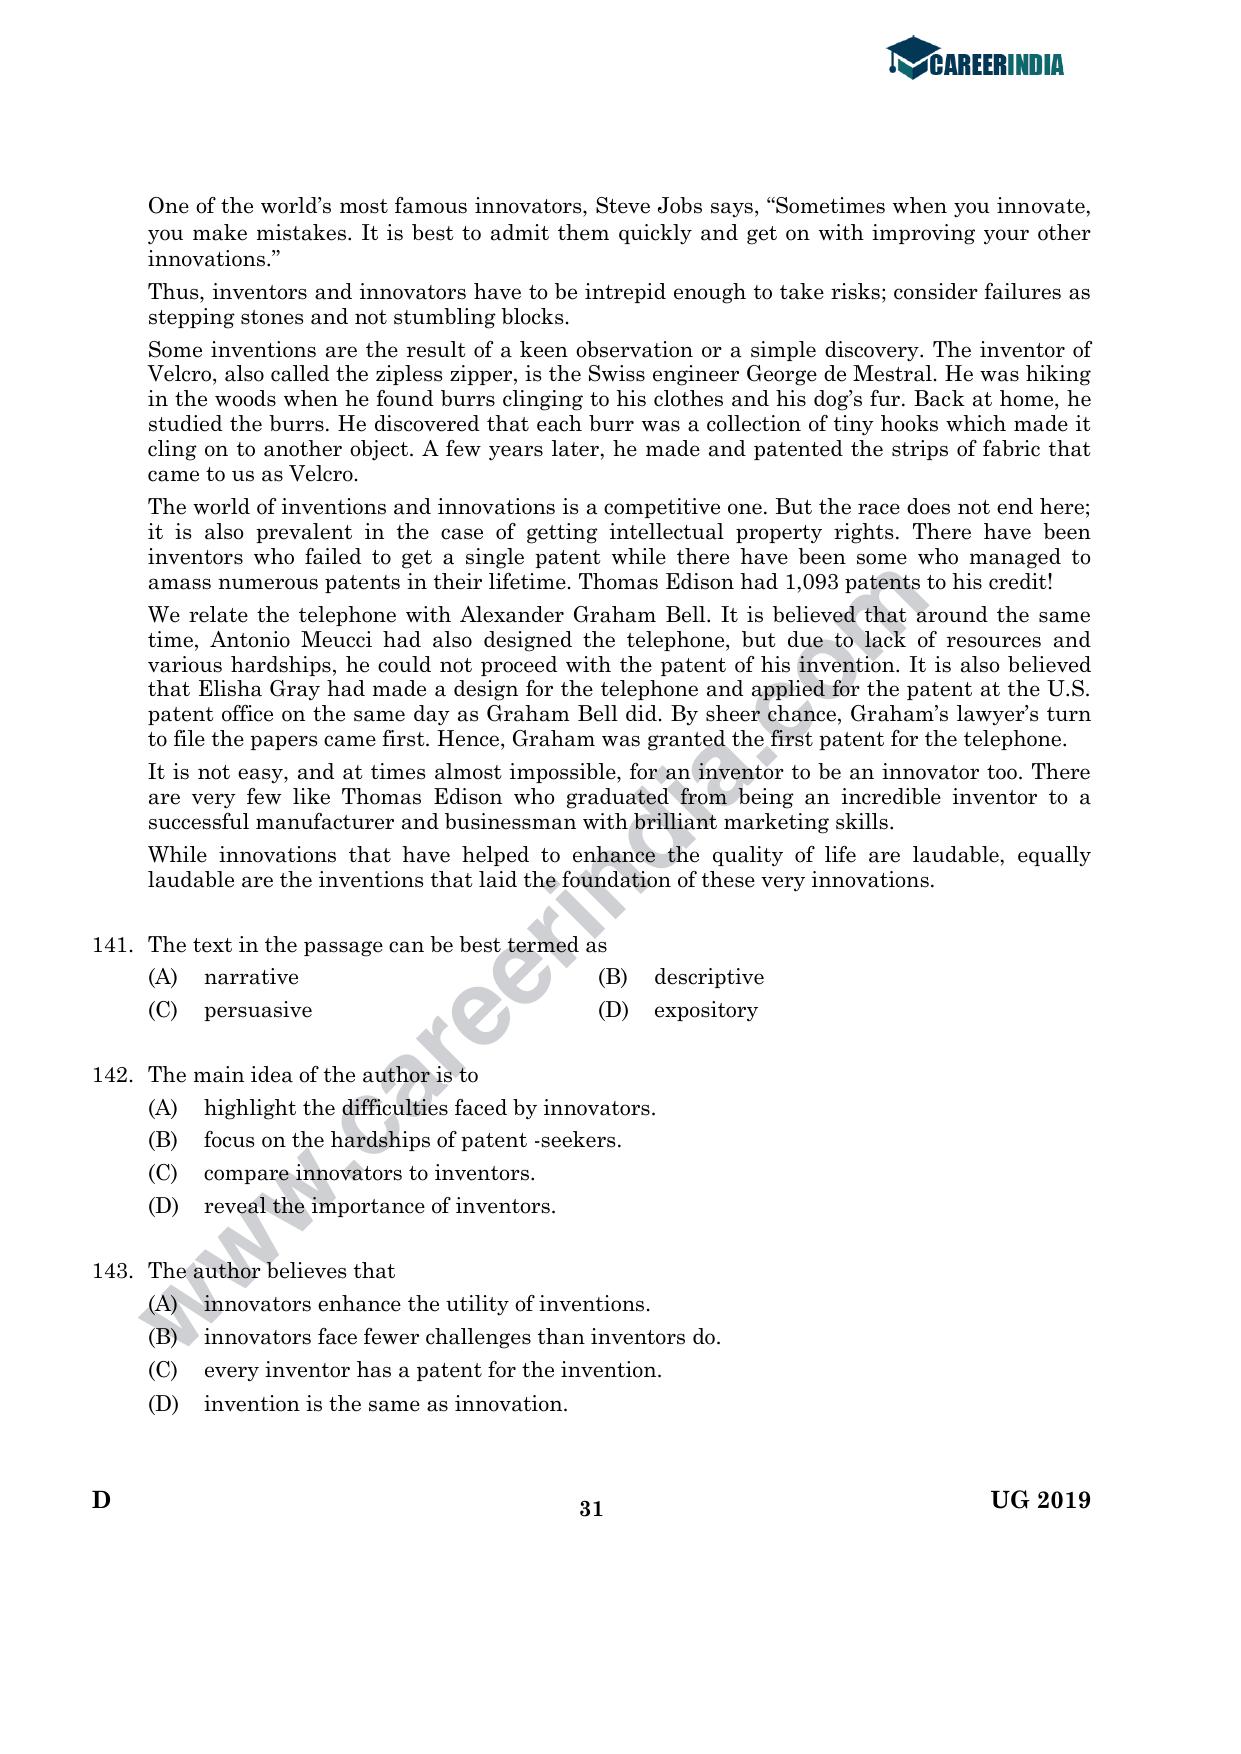 CLAT 2019 UG Logical-Reasoning Question Paper - Page 30